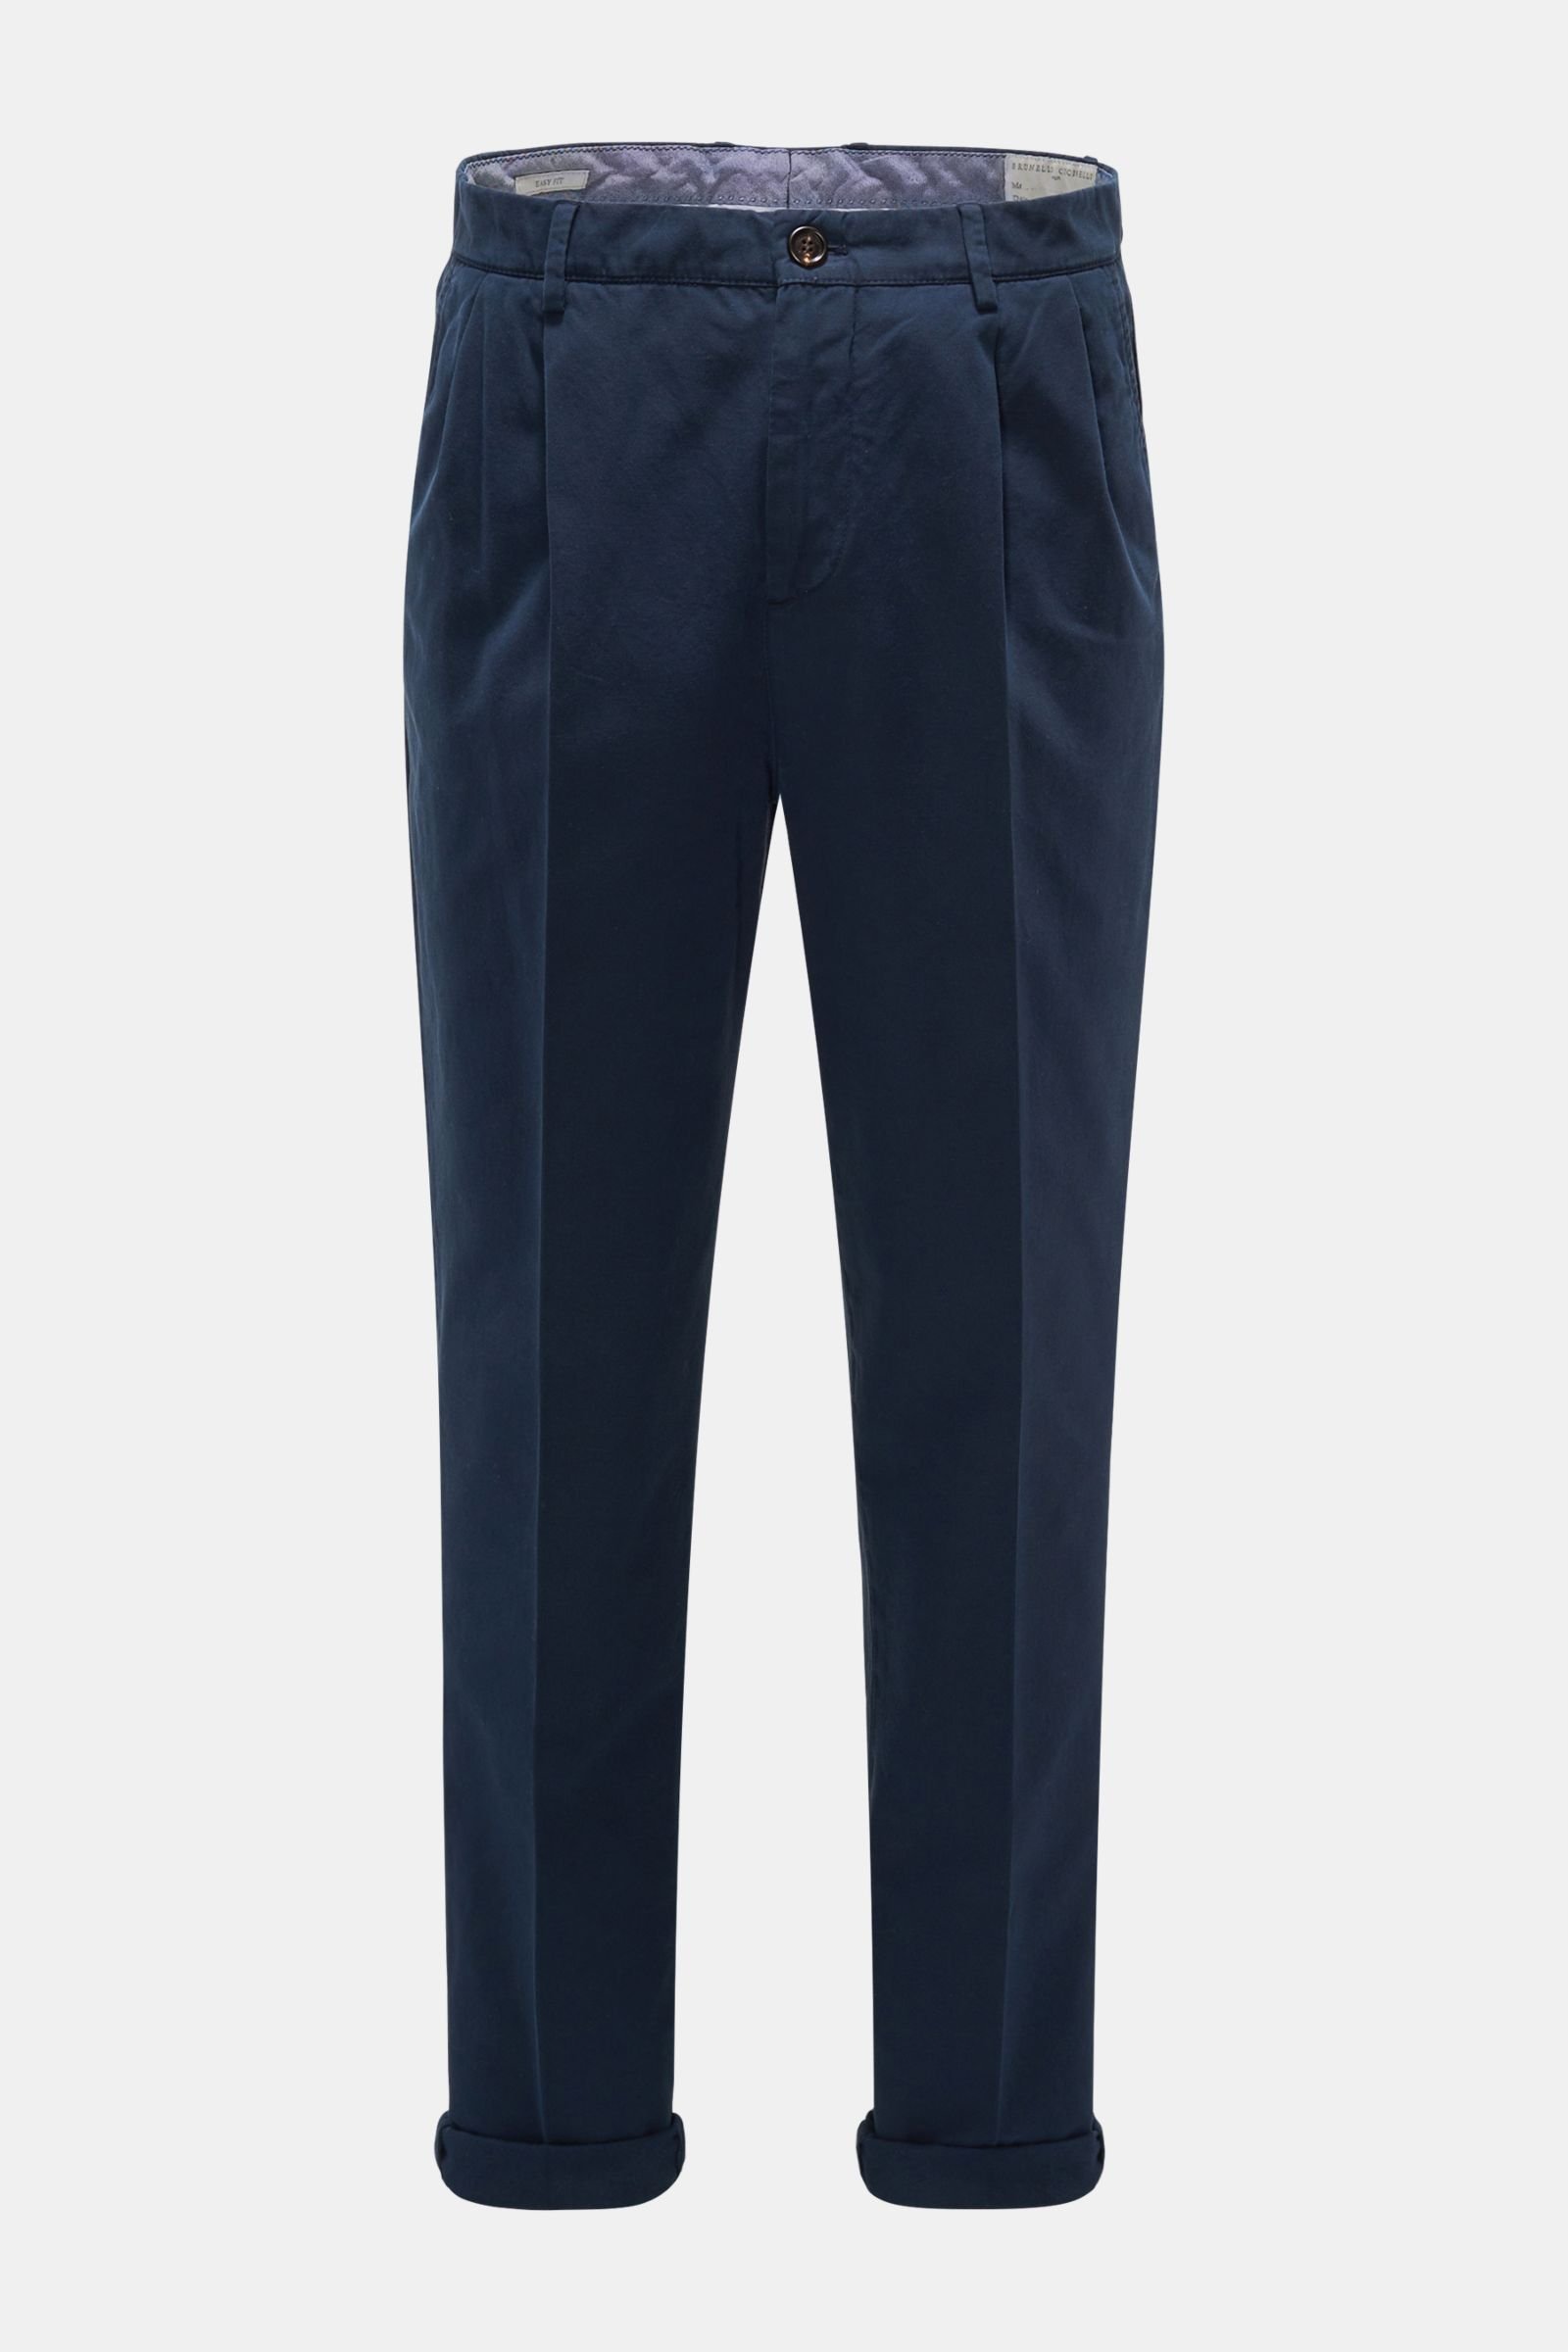 Chino 'Easy Fit' navy